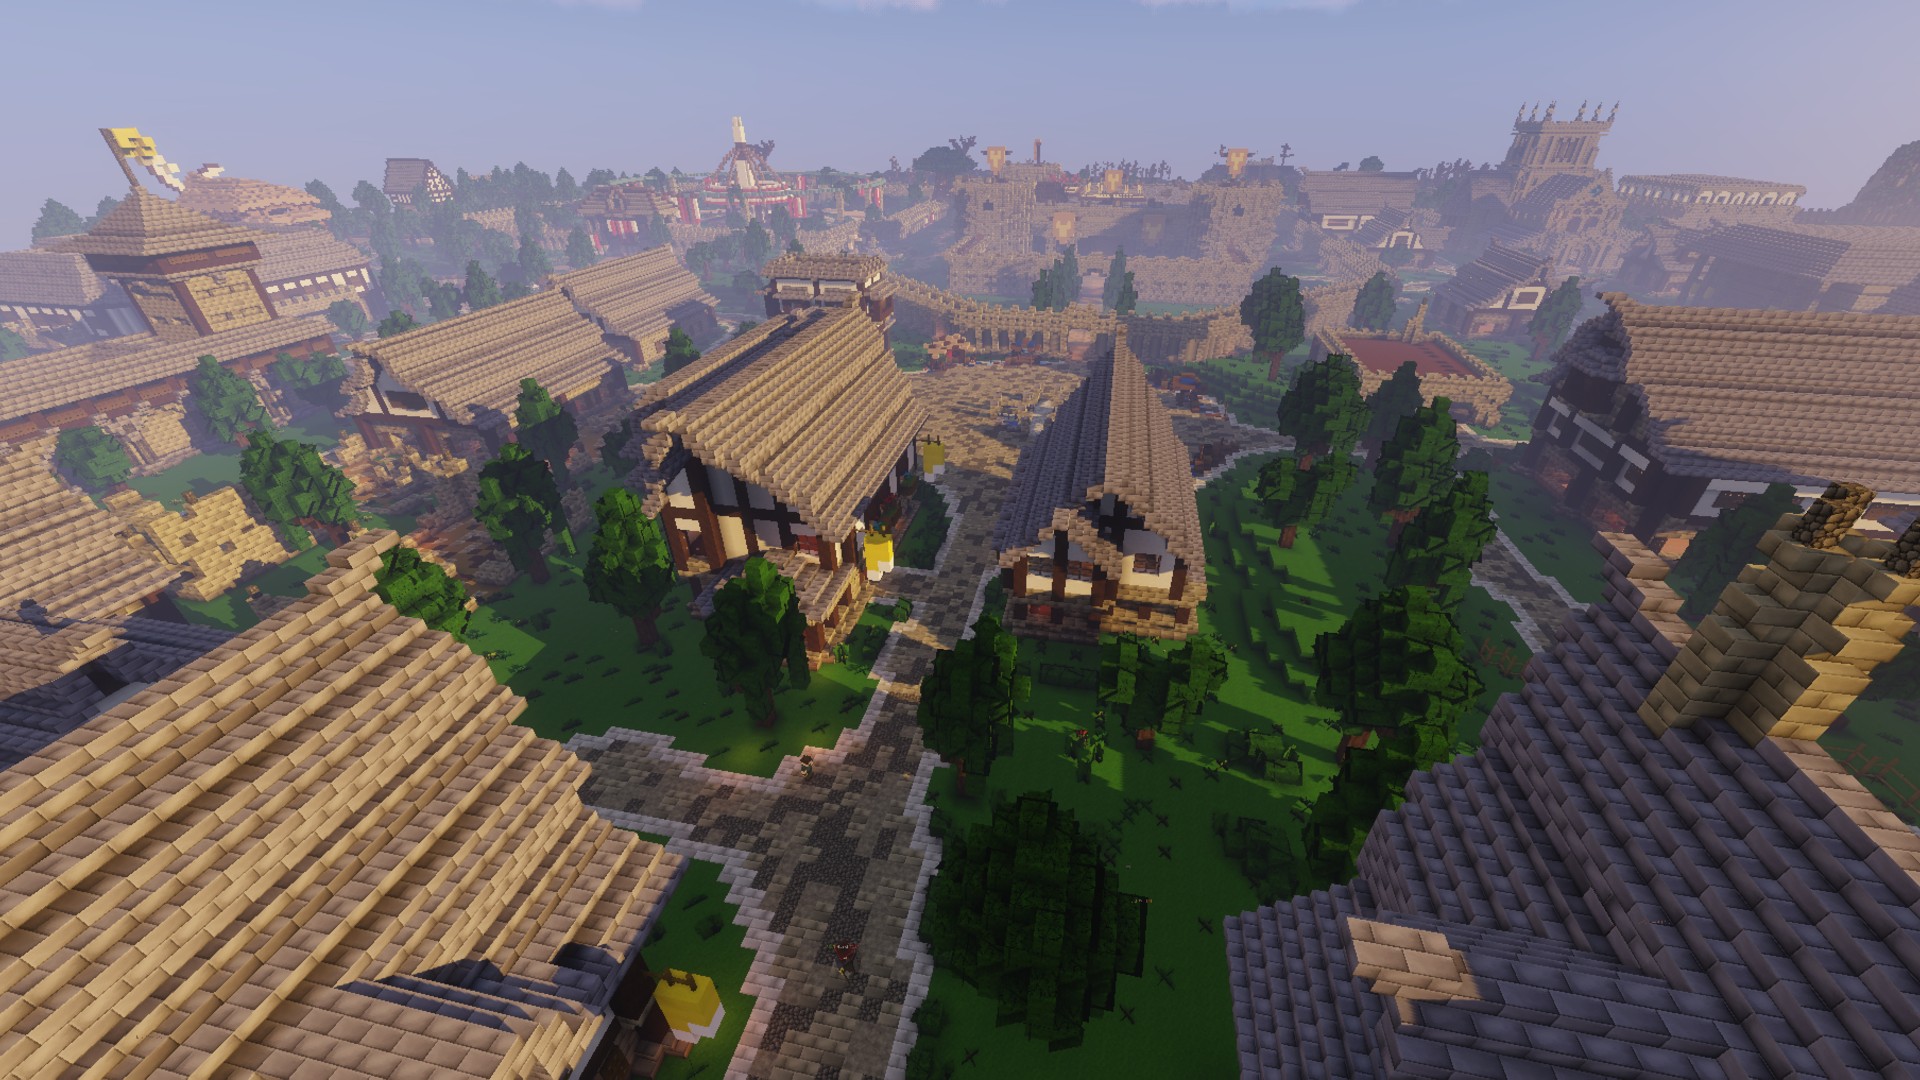 Best Minecraft servers: an aerial shot of a large town in the Minescape server.